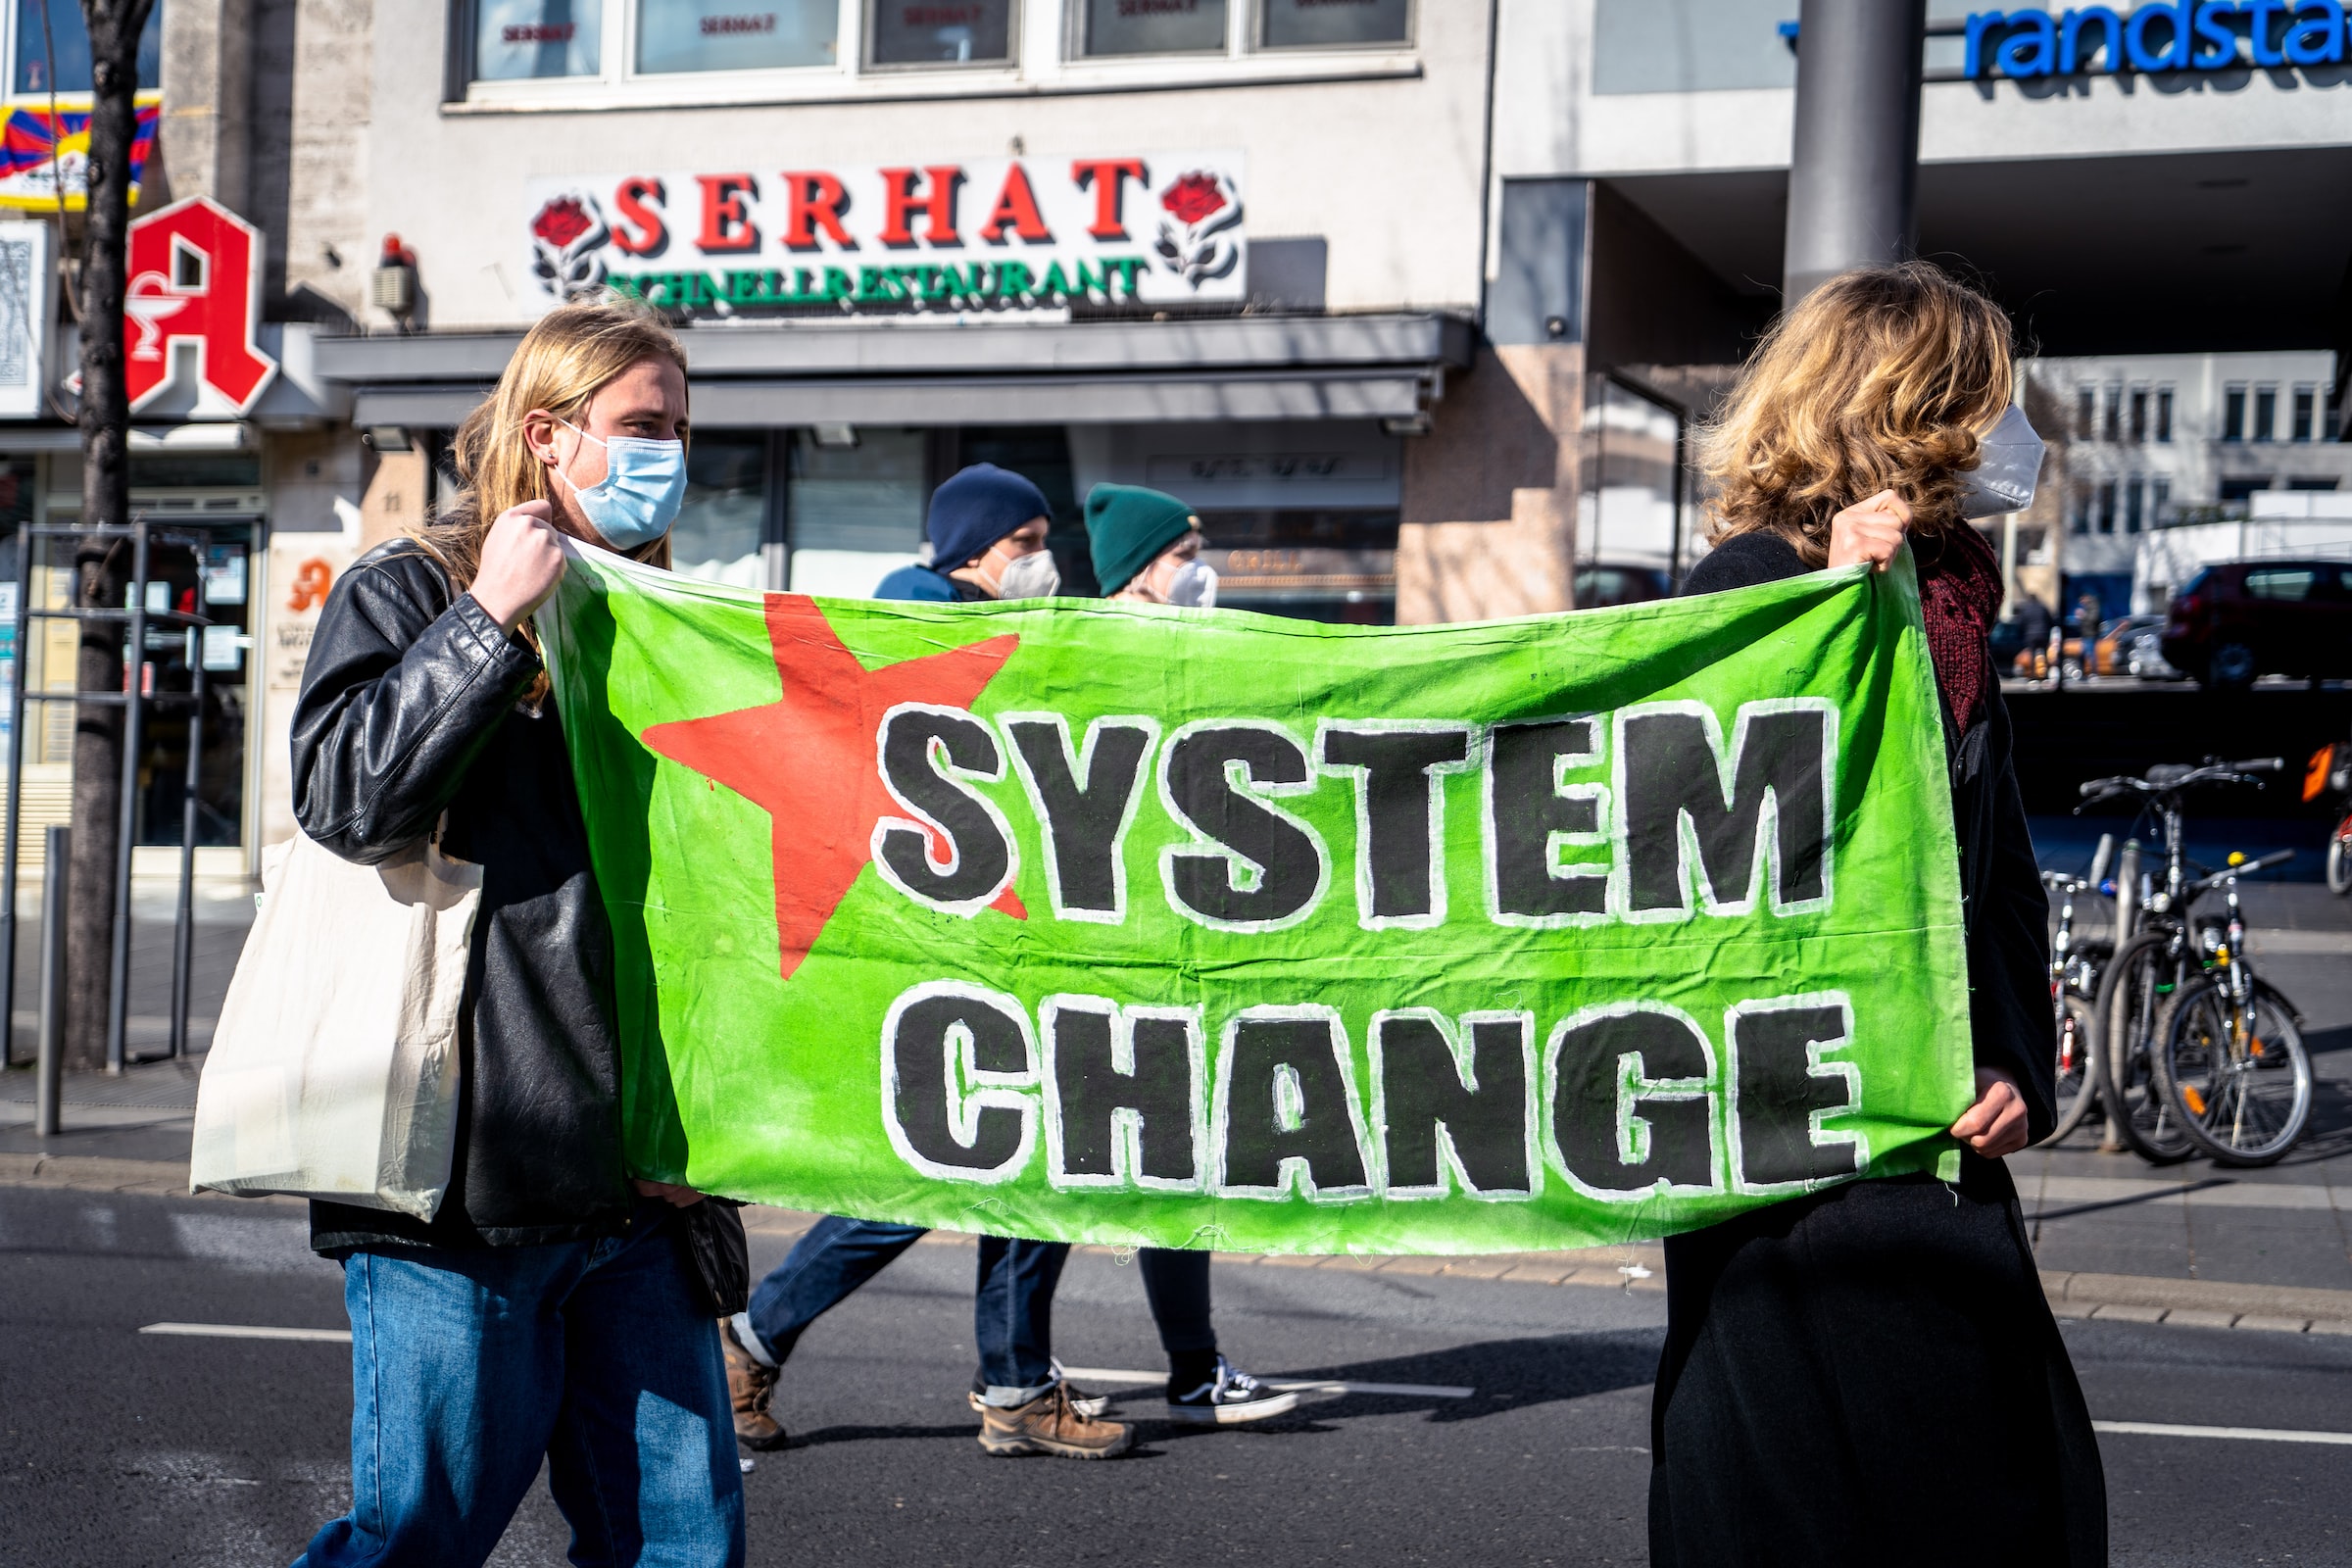 Two people holding a green banner that says "System Change" with a red star behind it